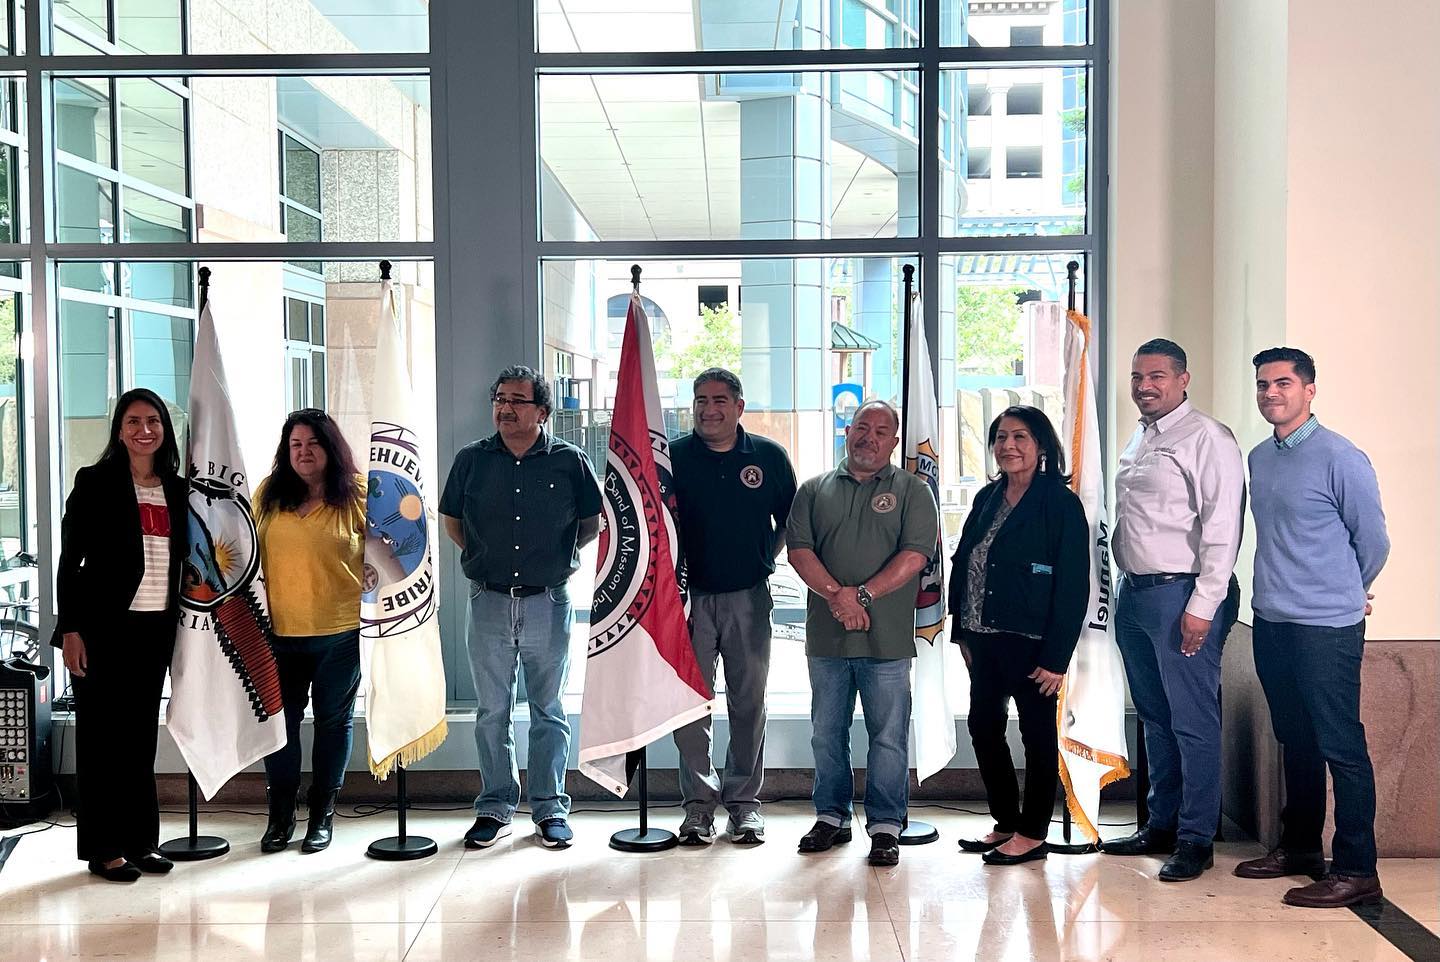 CalEPA staff and Tribal Advisory Committee members with tribal flags.